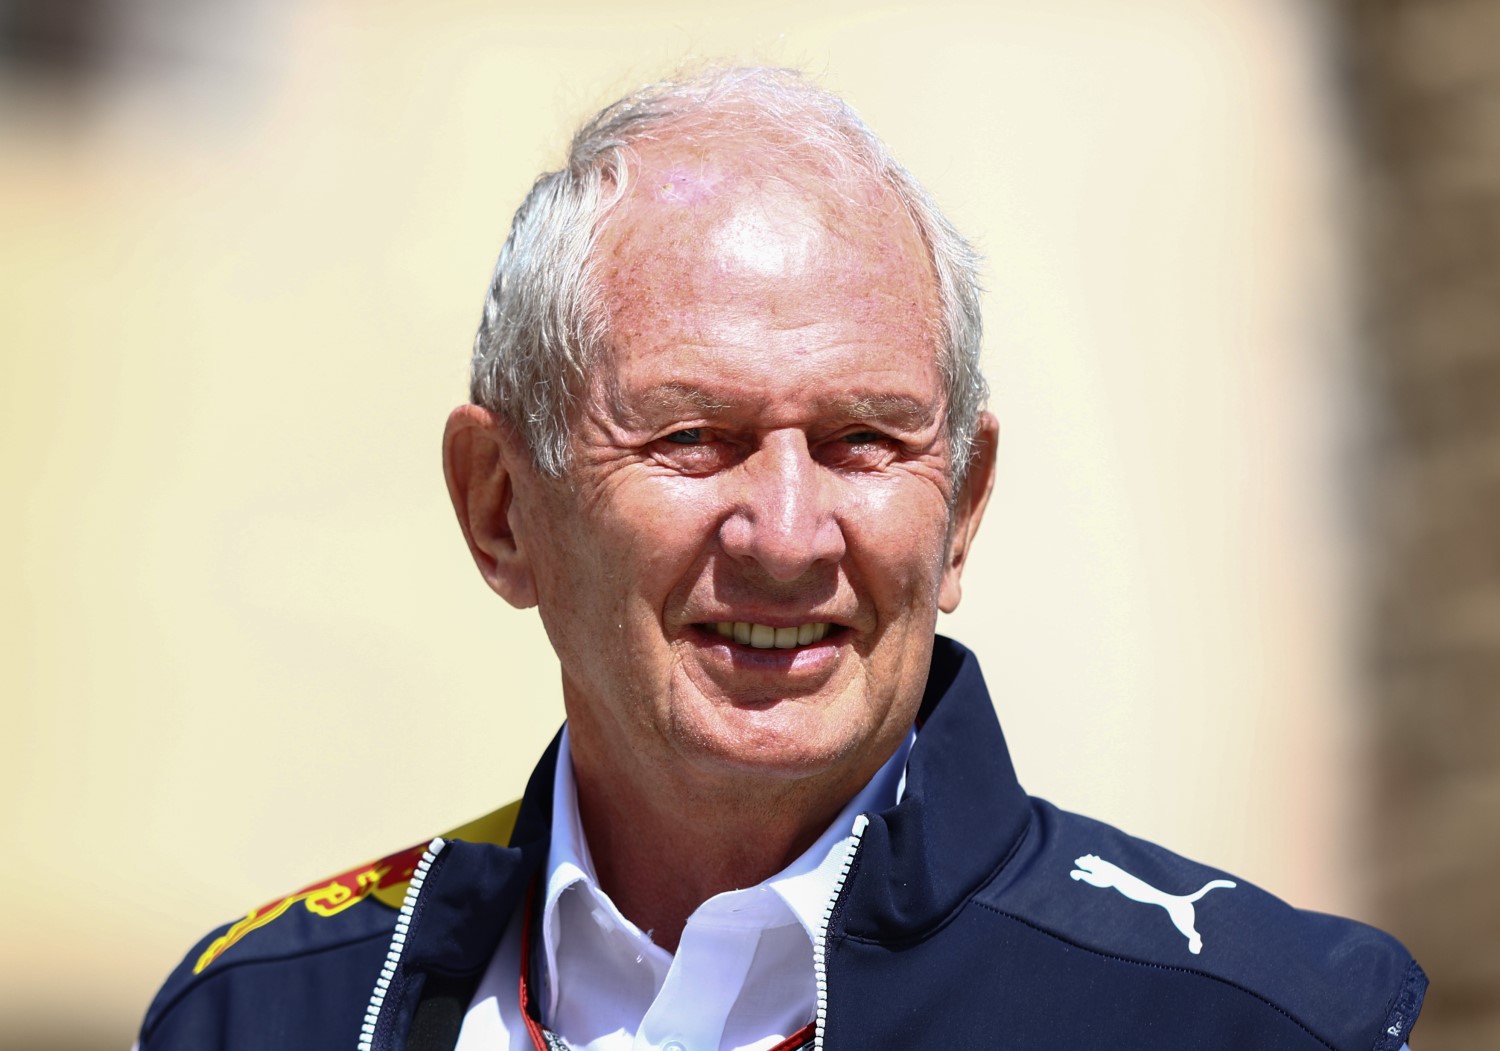 Red Bull Racing Team Consultant Dr Helmut Marko looks on in the Paddock before practice ahead of the F1 Grand Prix of Bahrain at Bahrain International Circuit on March 18, 2022 in Bahrain, Bahrain. (Photo by Mark Thompson/Getty Images) 